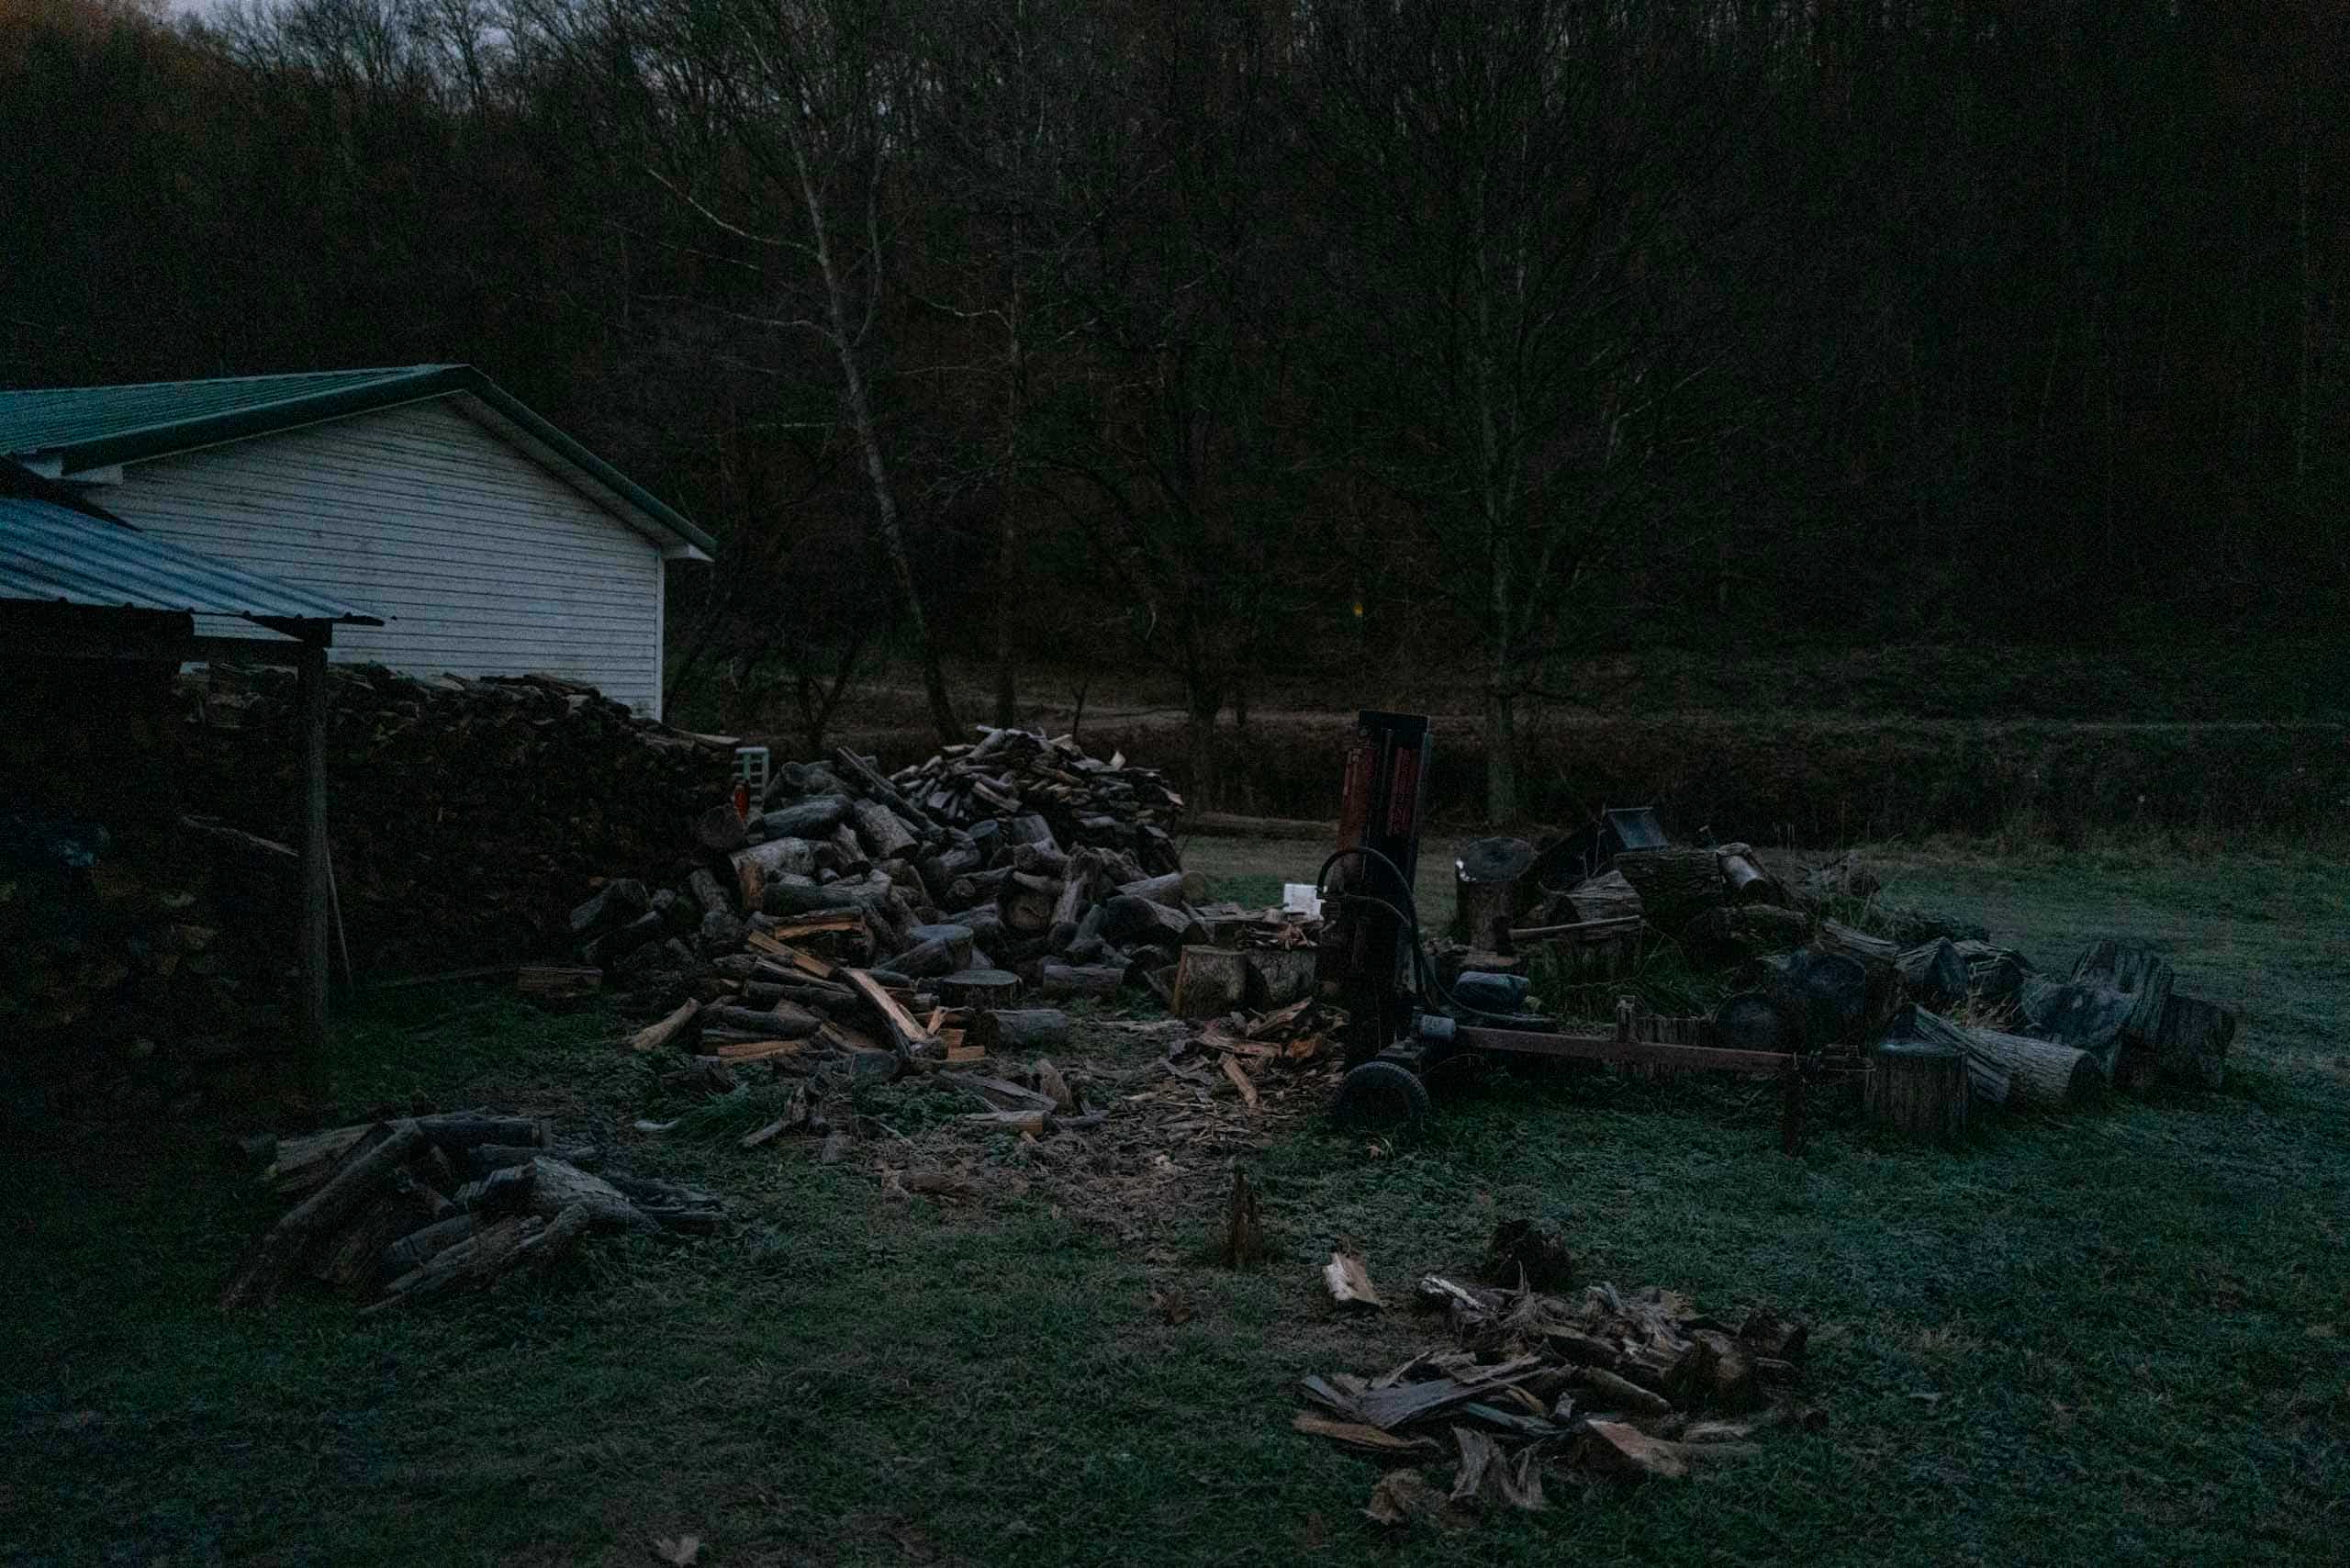 A pile of wood in front of a house at dawn.